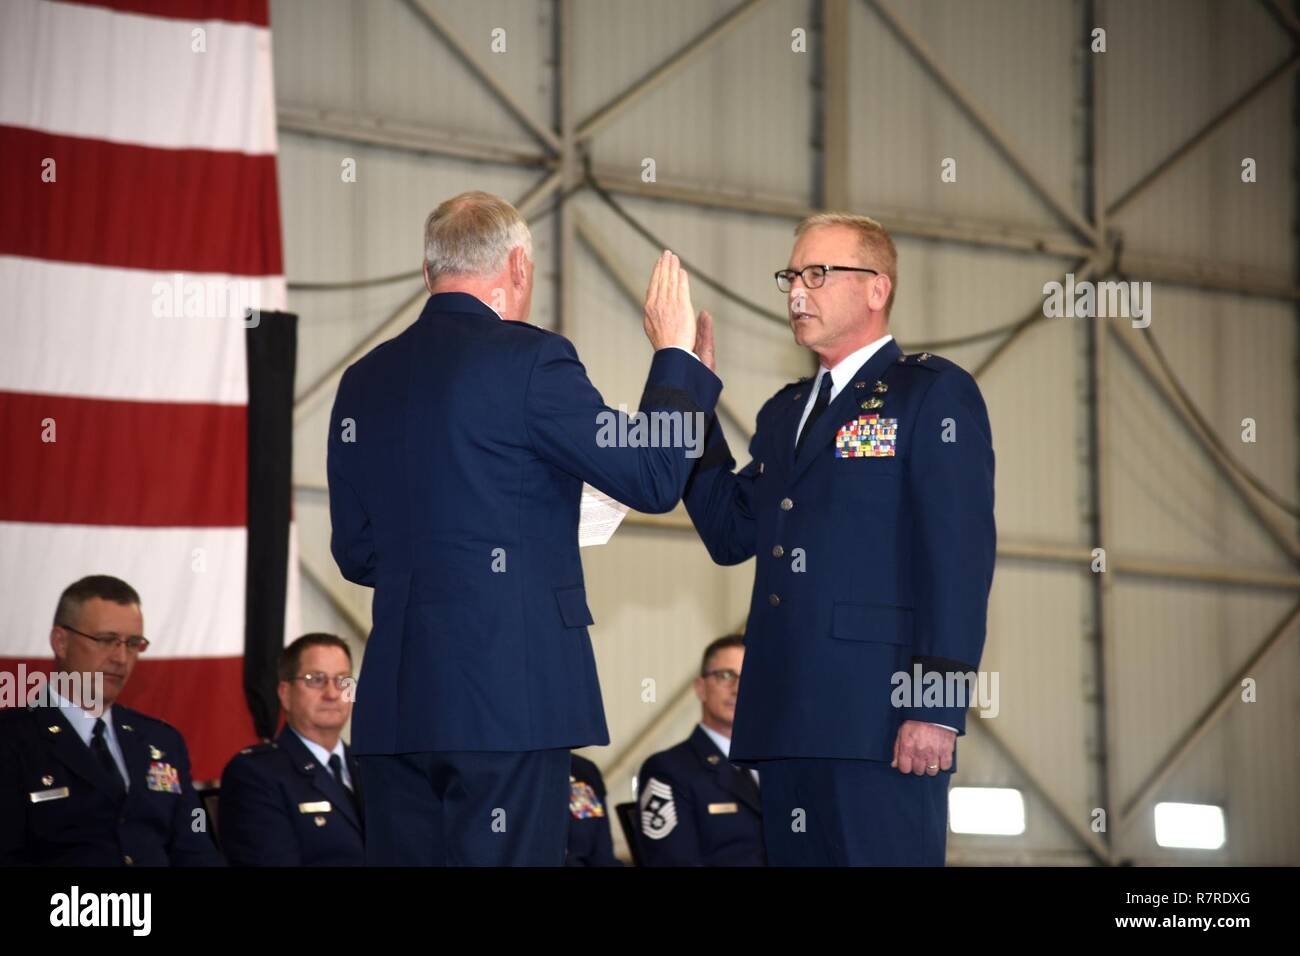 SIOUX FALLS, S.D. - Brig. Gen. Steven Warren, Assistant Adjutant General for Air, HQ SDANG, administered the oath of office to Brig. Gen. Joel DeGroot, during a transfer of authority ceremony at Joe Foss Field April 1st.  DeGroot previously served as the 114TH Maintenance group commander. Stock Photo